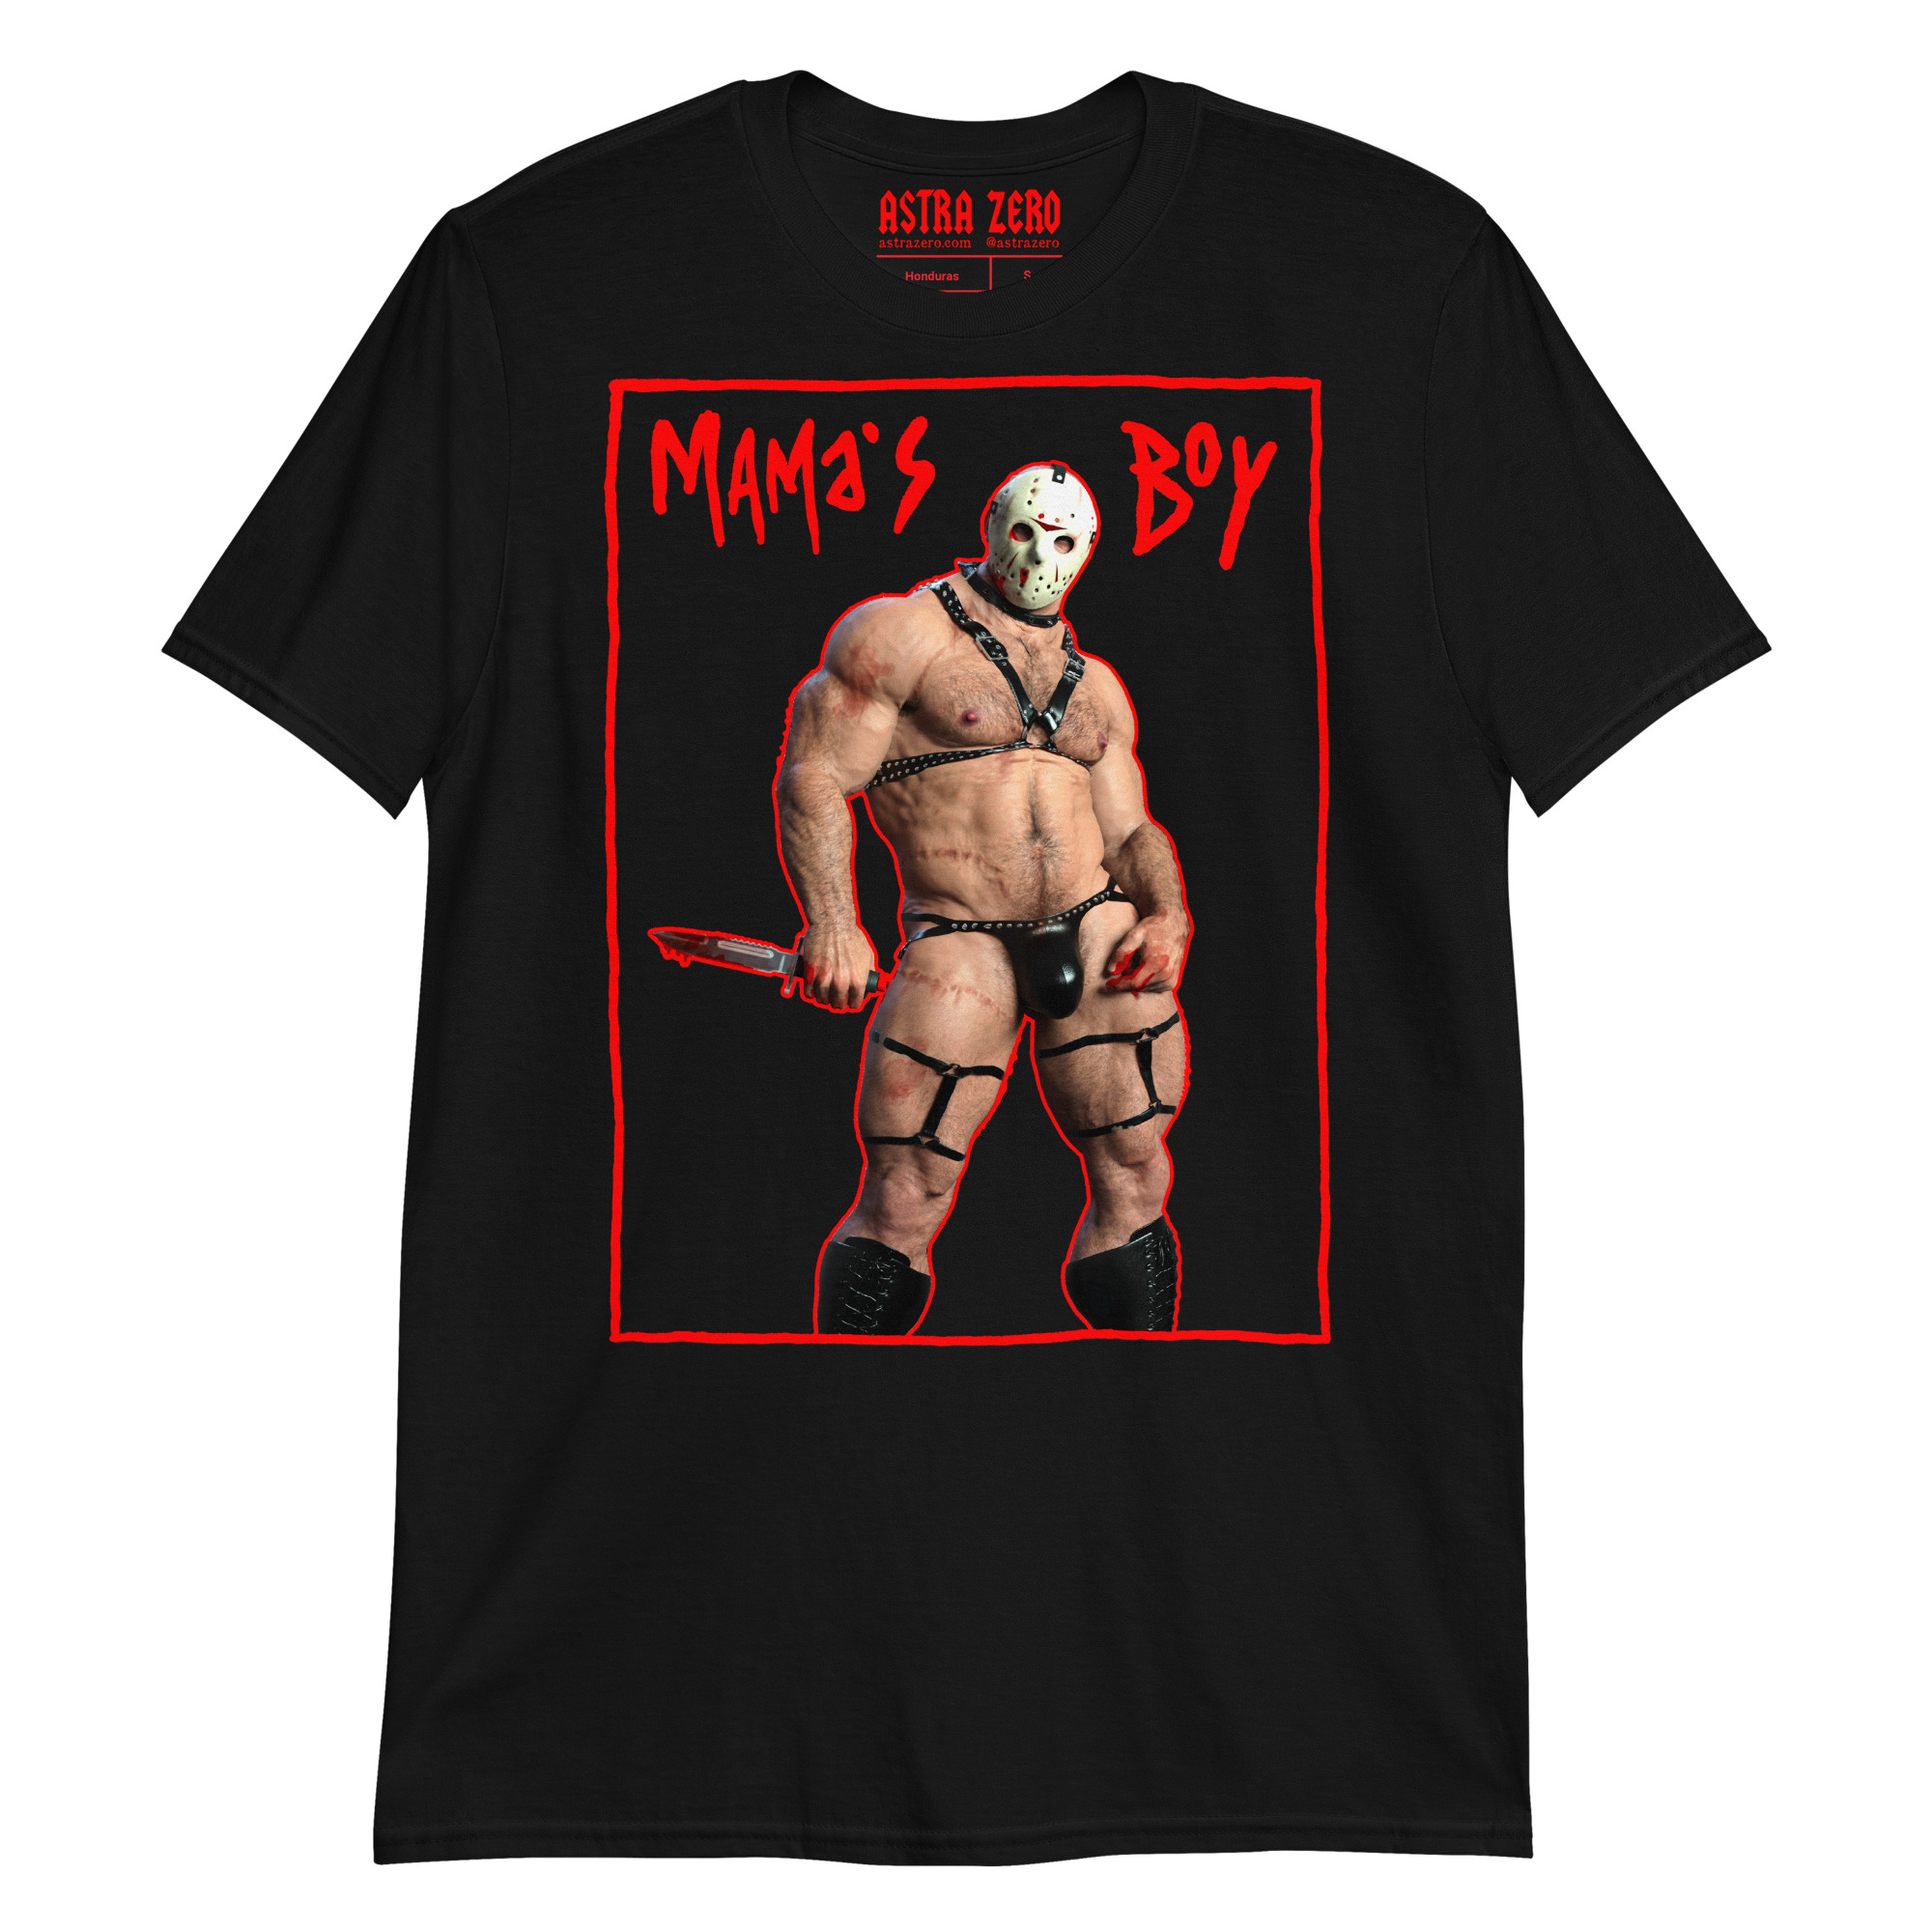 Featured image for “Mama’s Boy - Short-Sleeve Unisex T-Shirt”